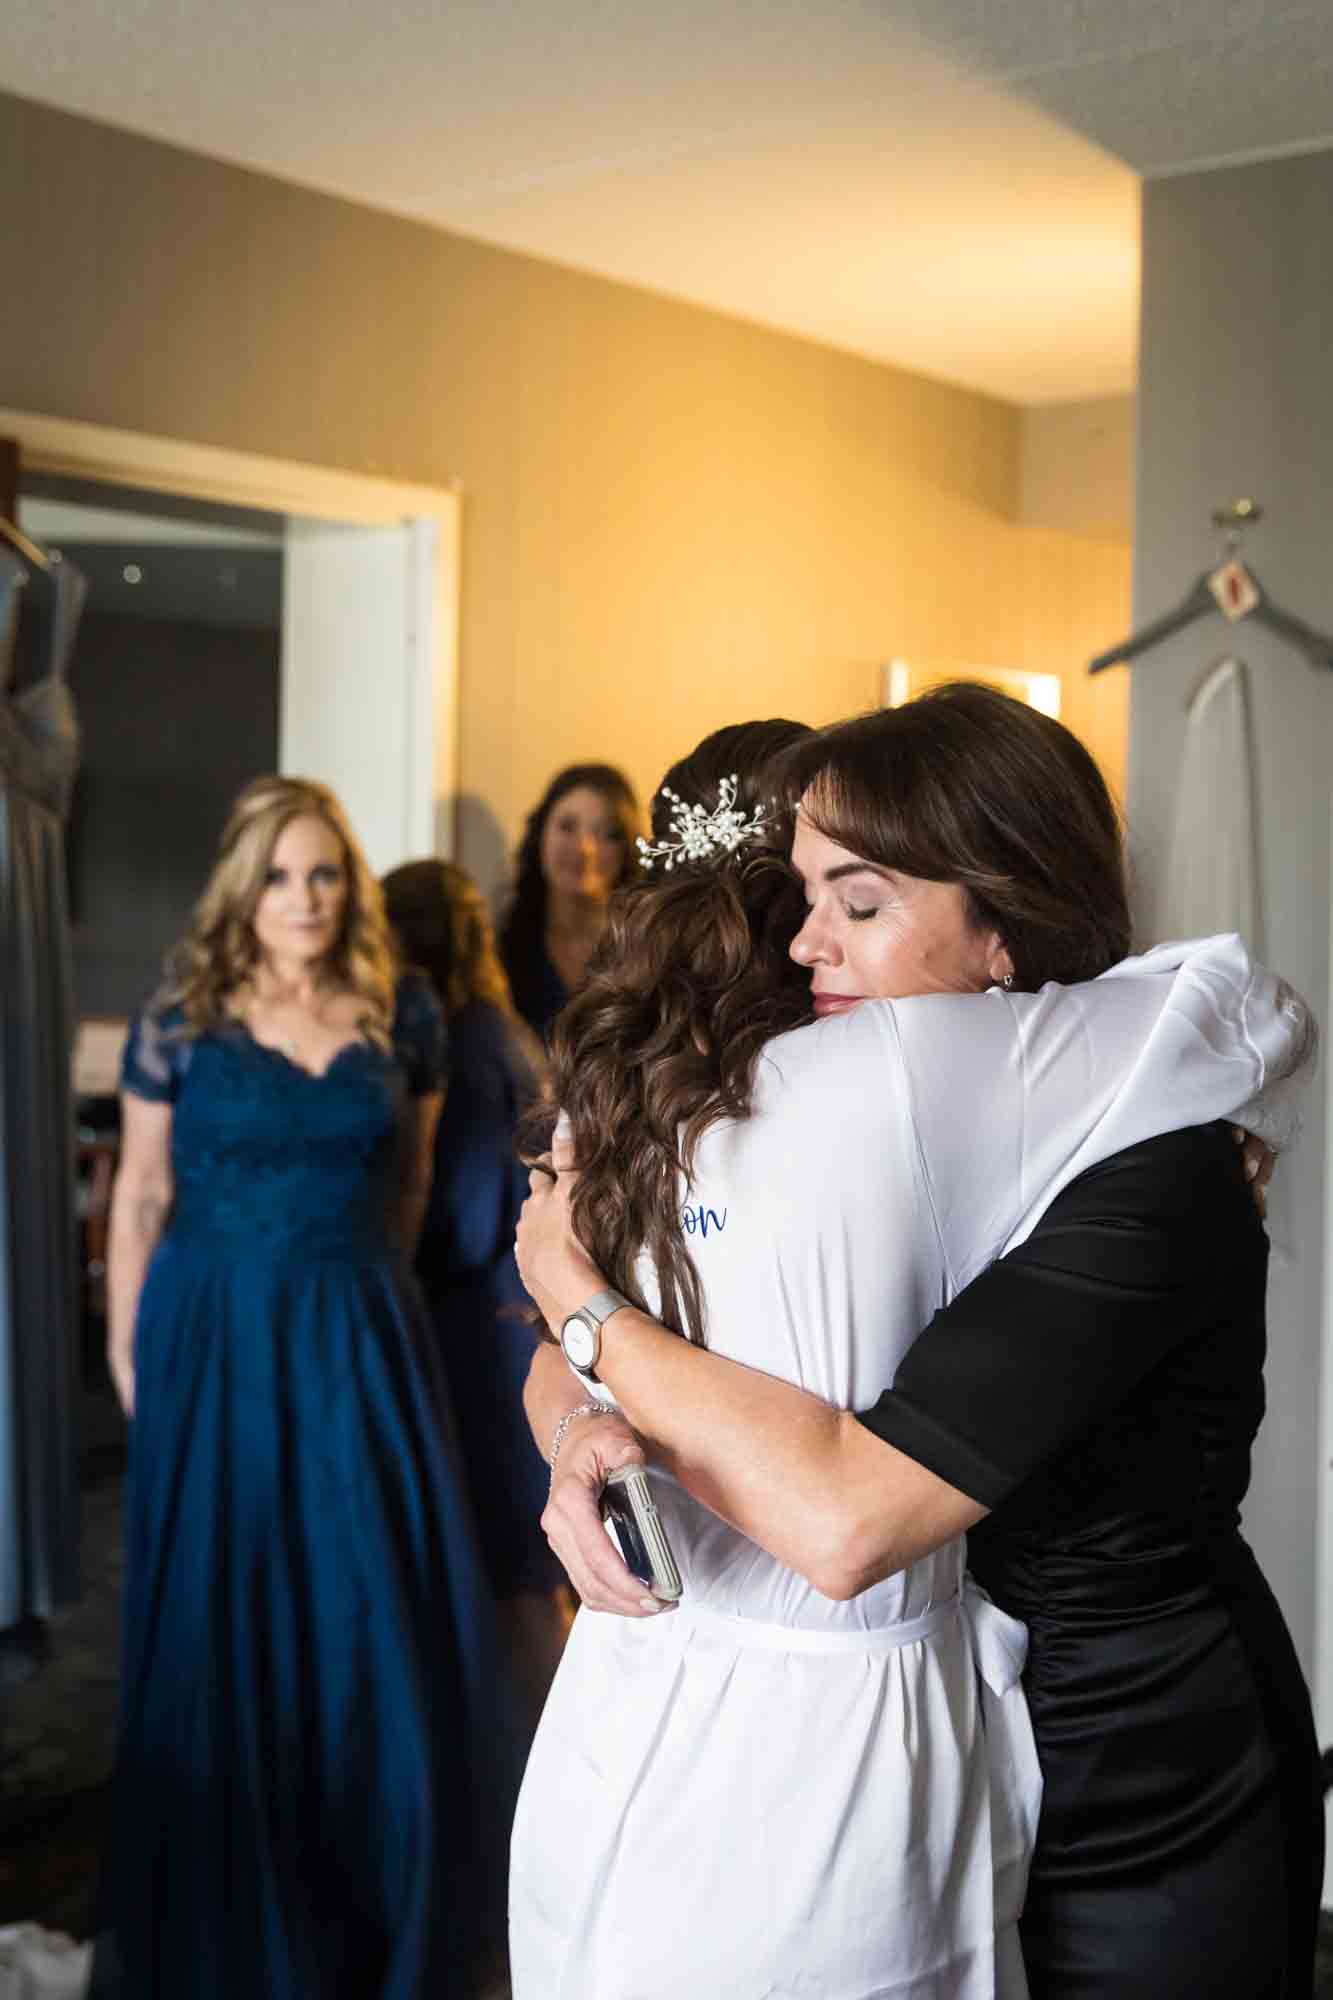 Woman hugging bride with other women in background watching